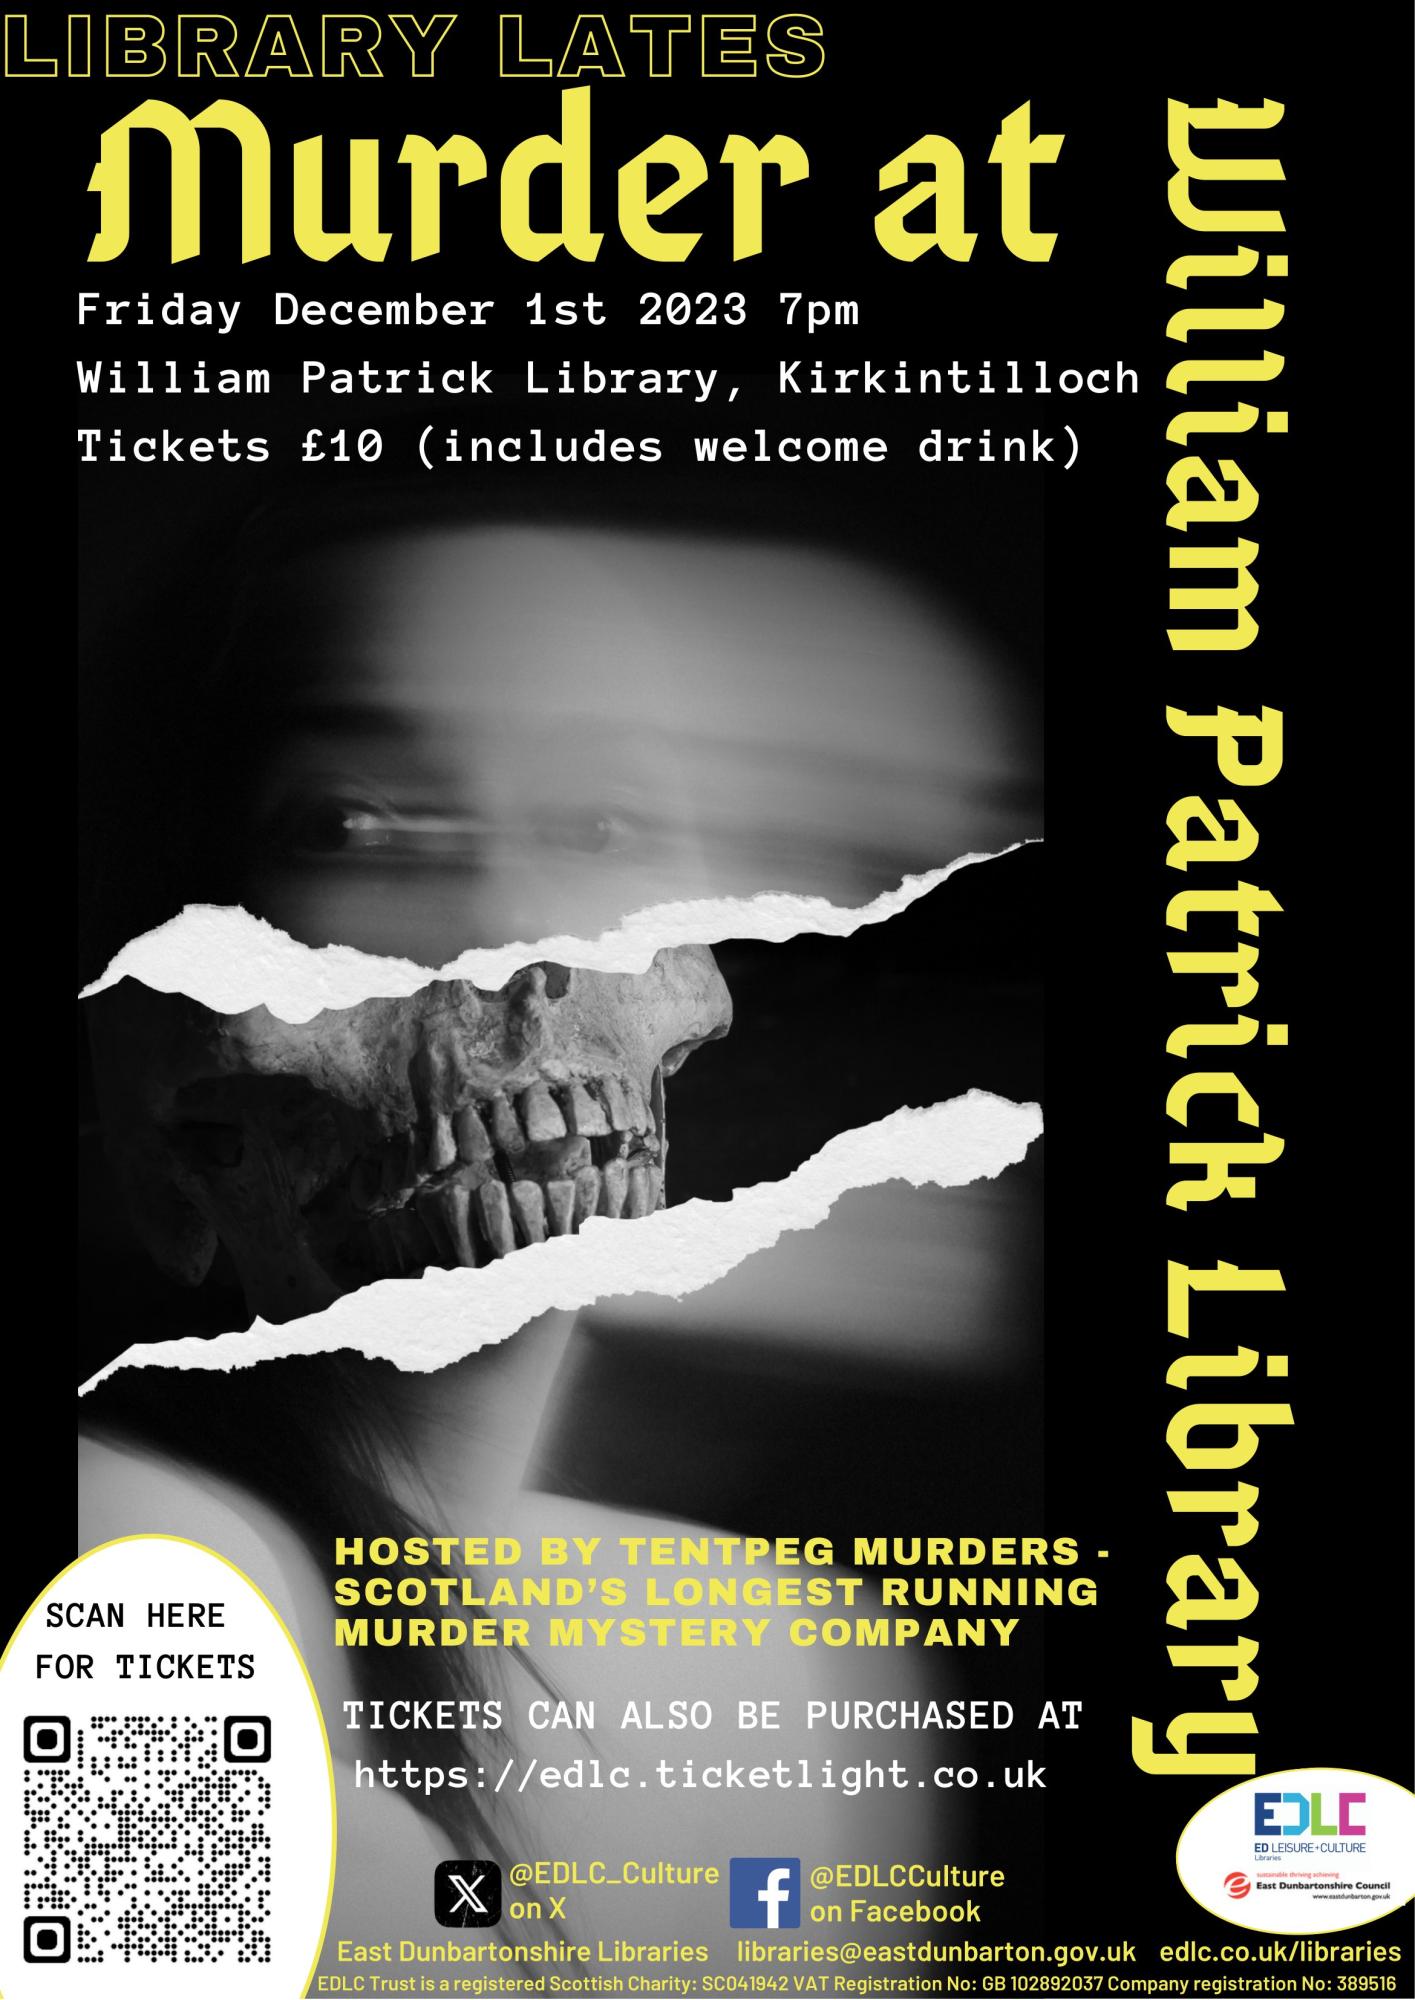 Poster for murder mystery event at William Patrick Library, including image of a skull and wording - contained within text of article